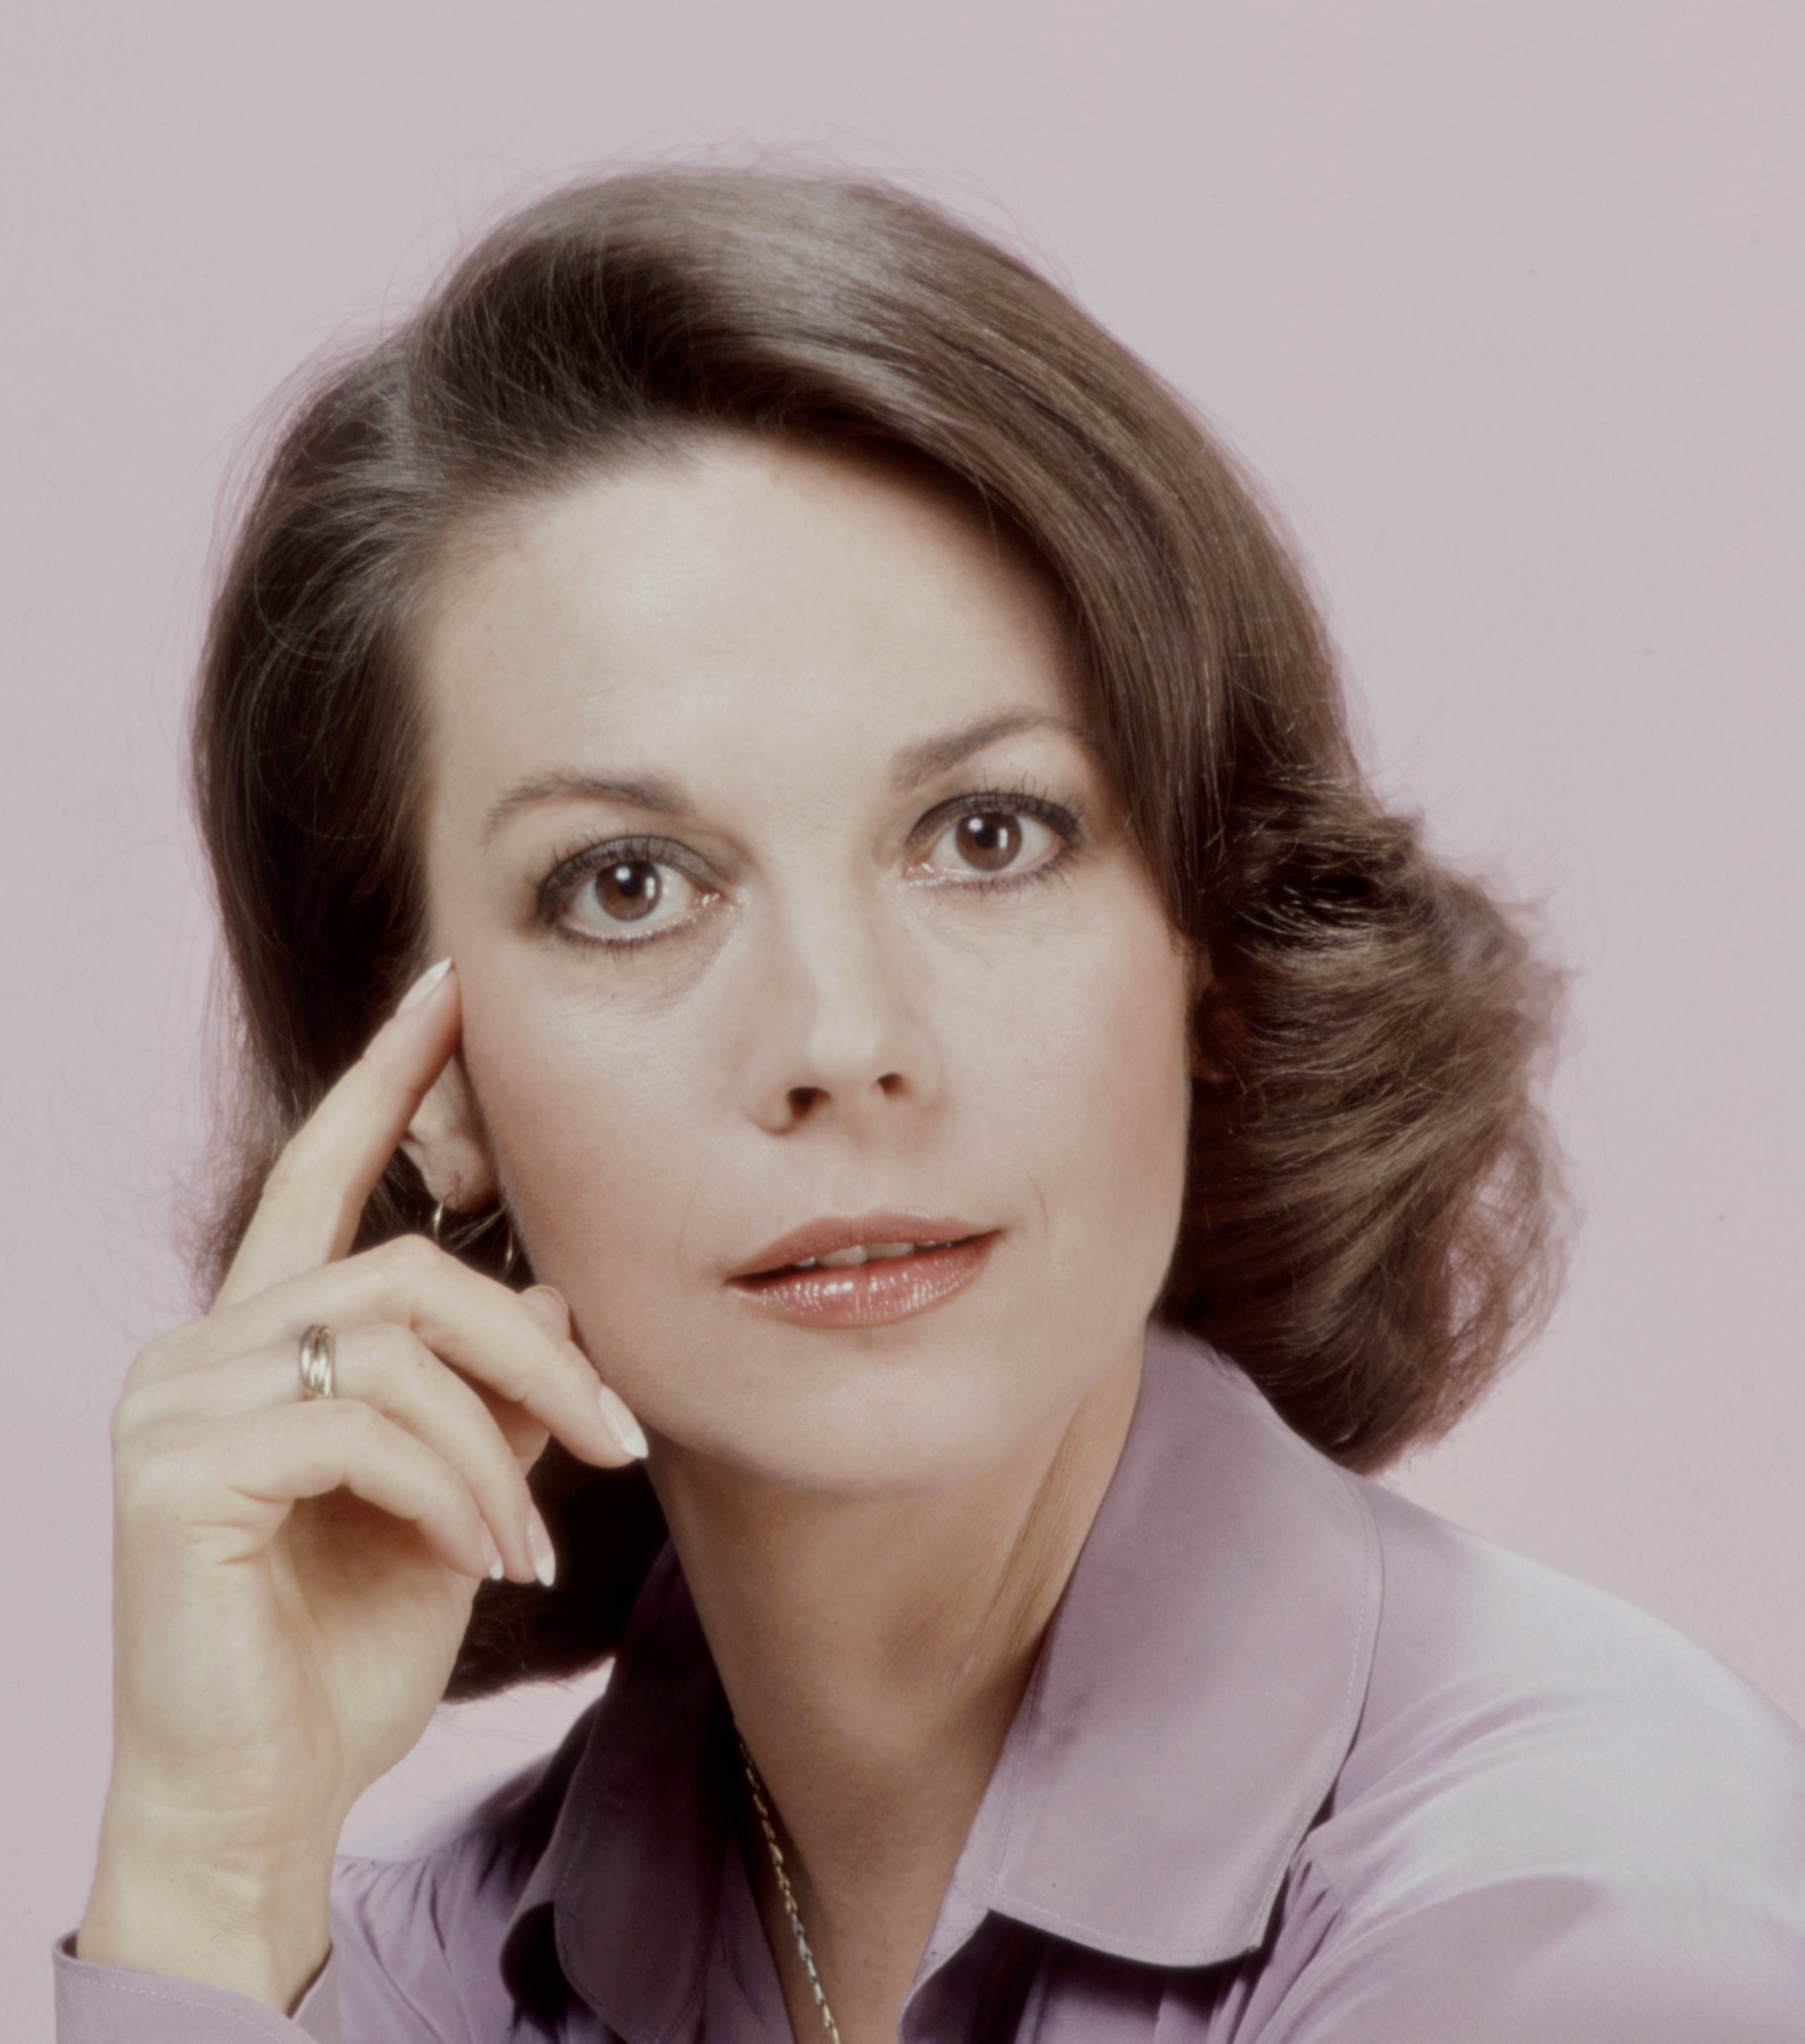 Unspecified - 1979: Natalie Wood promotional photo for the ABC tv movie &#x27;The Cracker Factory&#x27;.